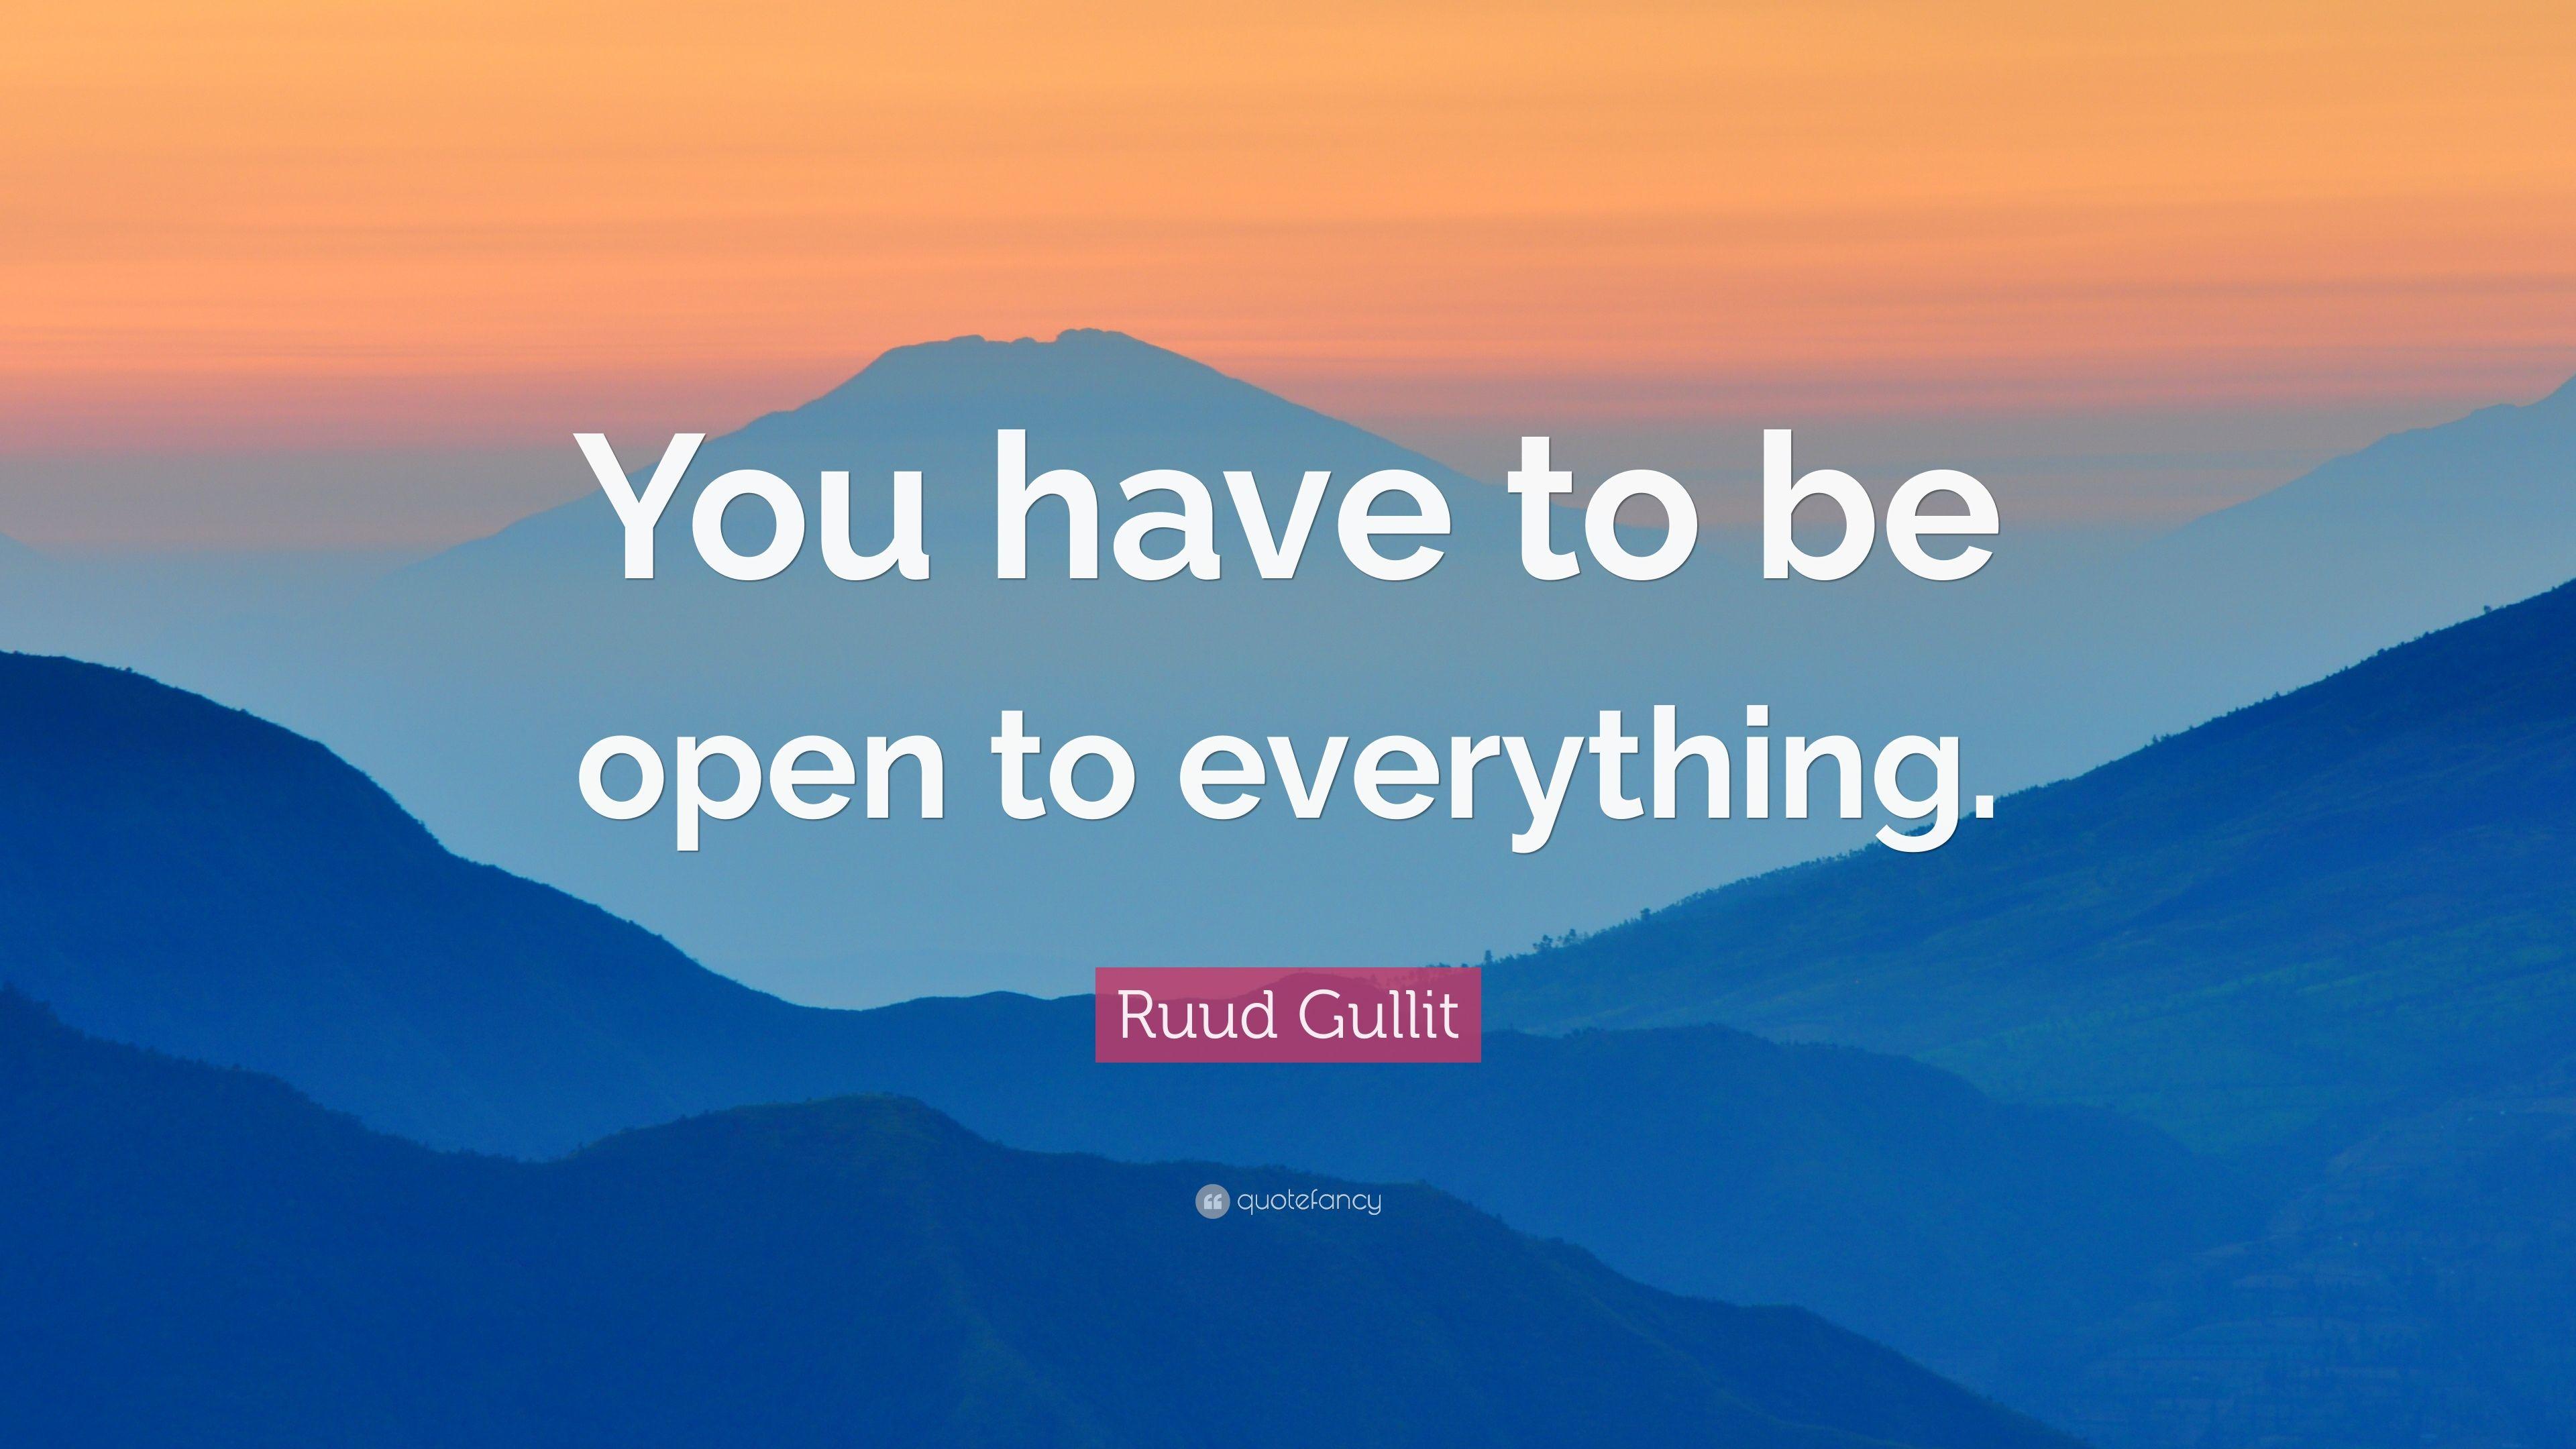 Ruud Gullit Quote: “You have to be open to everything.” 7